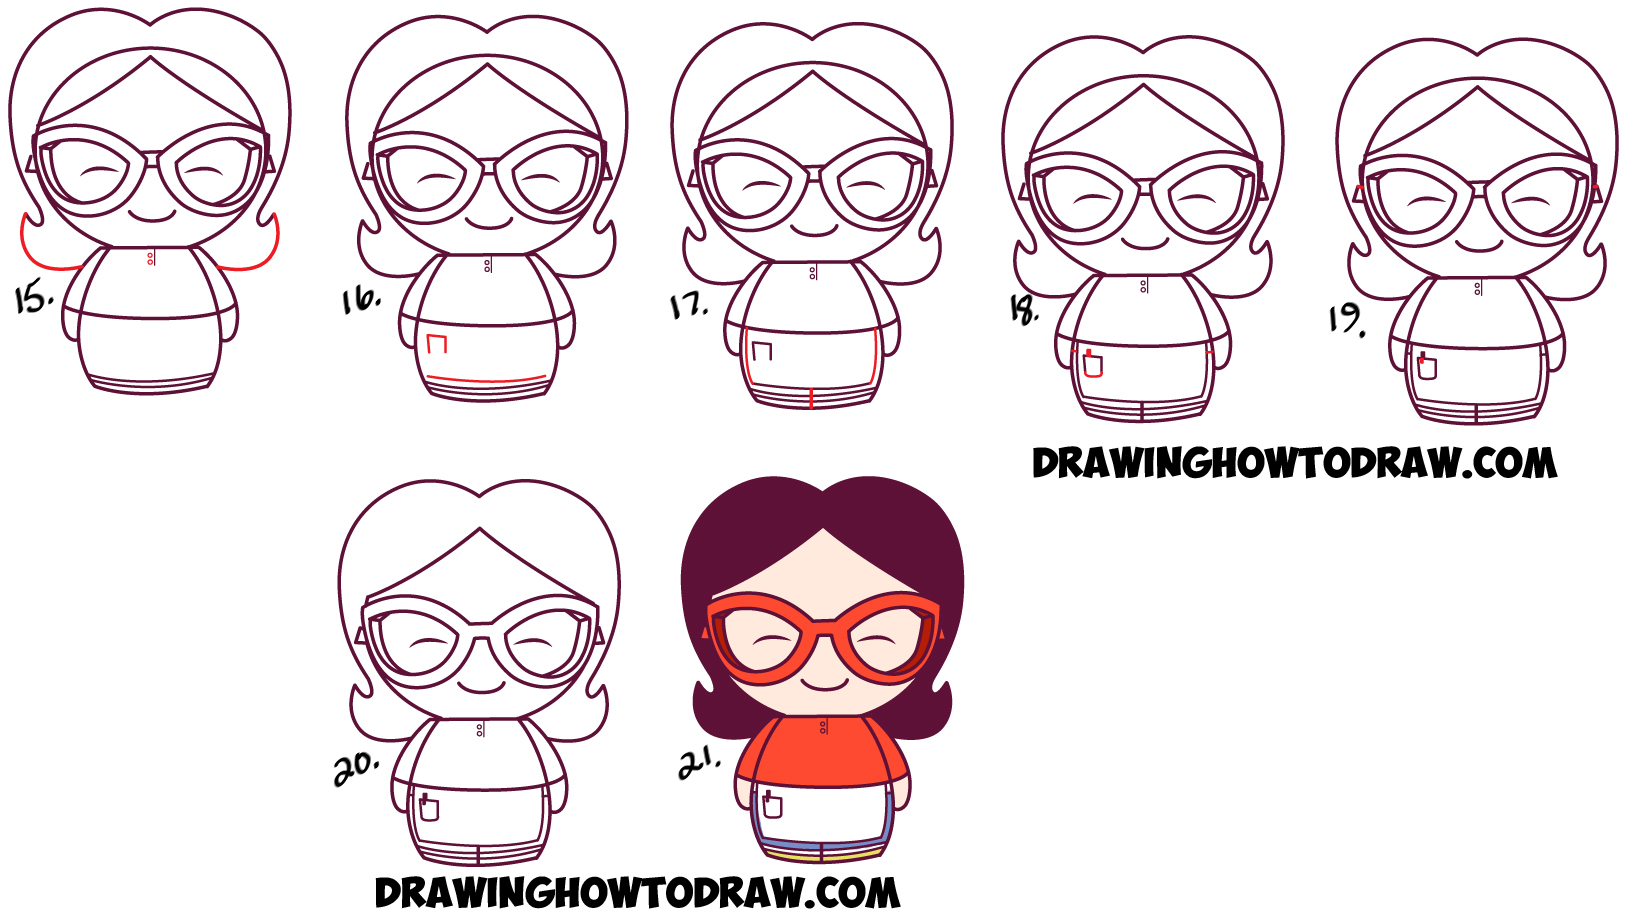 Learn How to Draw Cute, Baby, Kawaii, Chibi Linda (Mom) from Bob's Burgers - Simple Step by Step Drawing Lesson